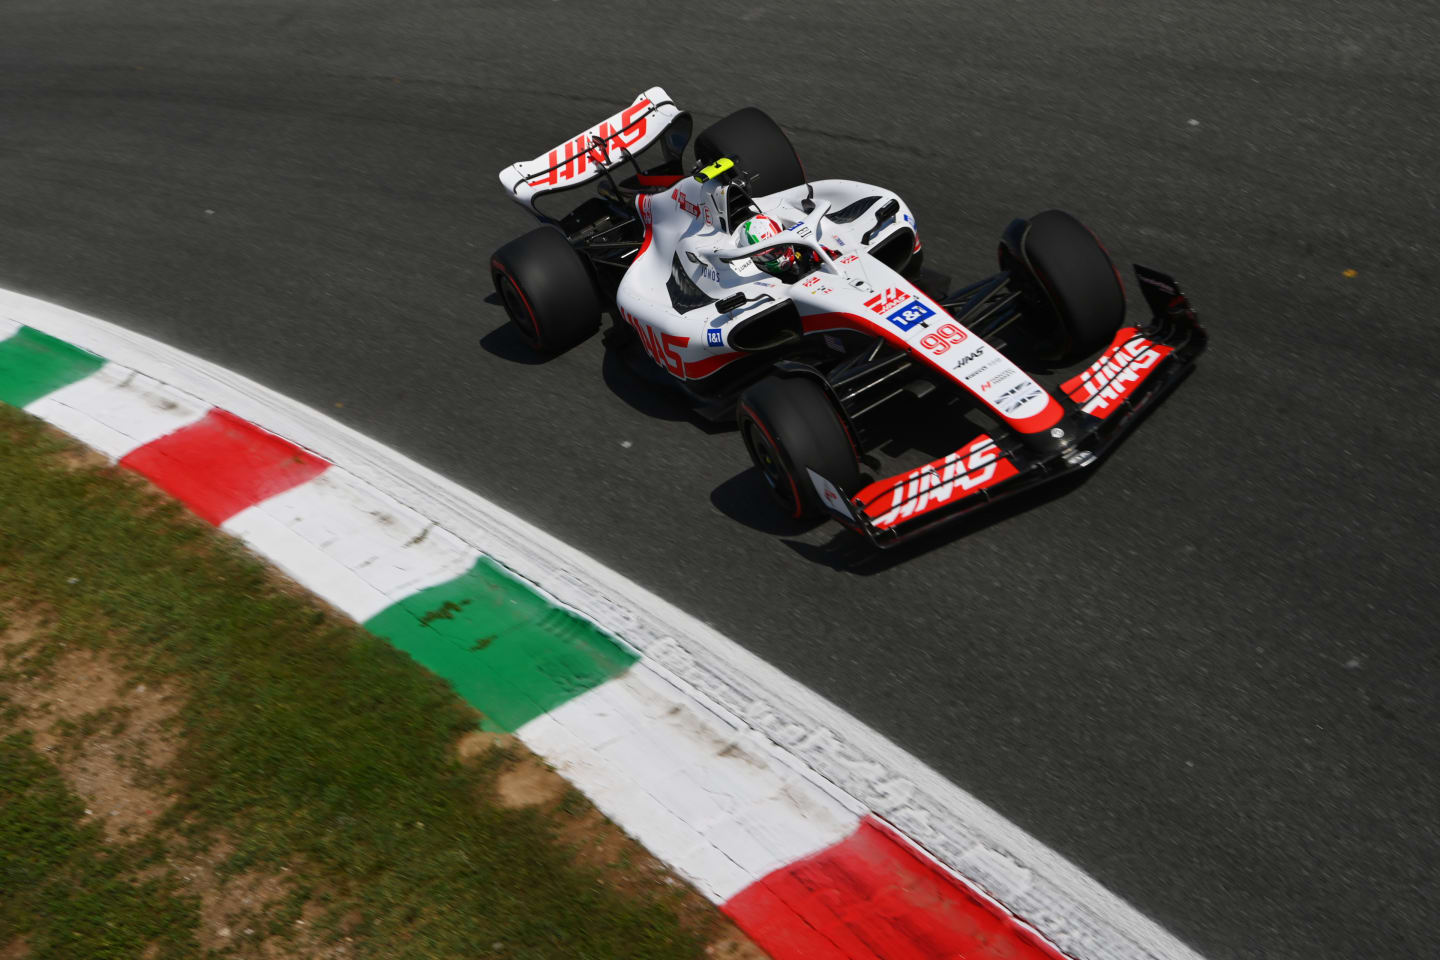 MONZA, ITALY - SEPTEMBER 09: Antonion Giovinazzi of Italy driving the (99) Haas F1 VF-22 Ferrari on track during practice ahead of the F1 Grand Prix of Italy at Autodromo Nazionale Monza on September 09, 2022 in Monza, Italy. (Photo by Dan Mullan/Getty Images)